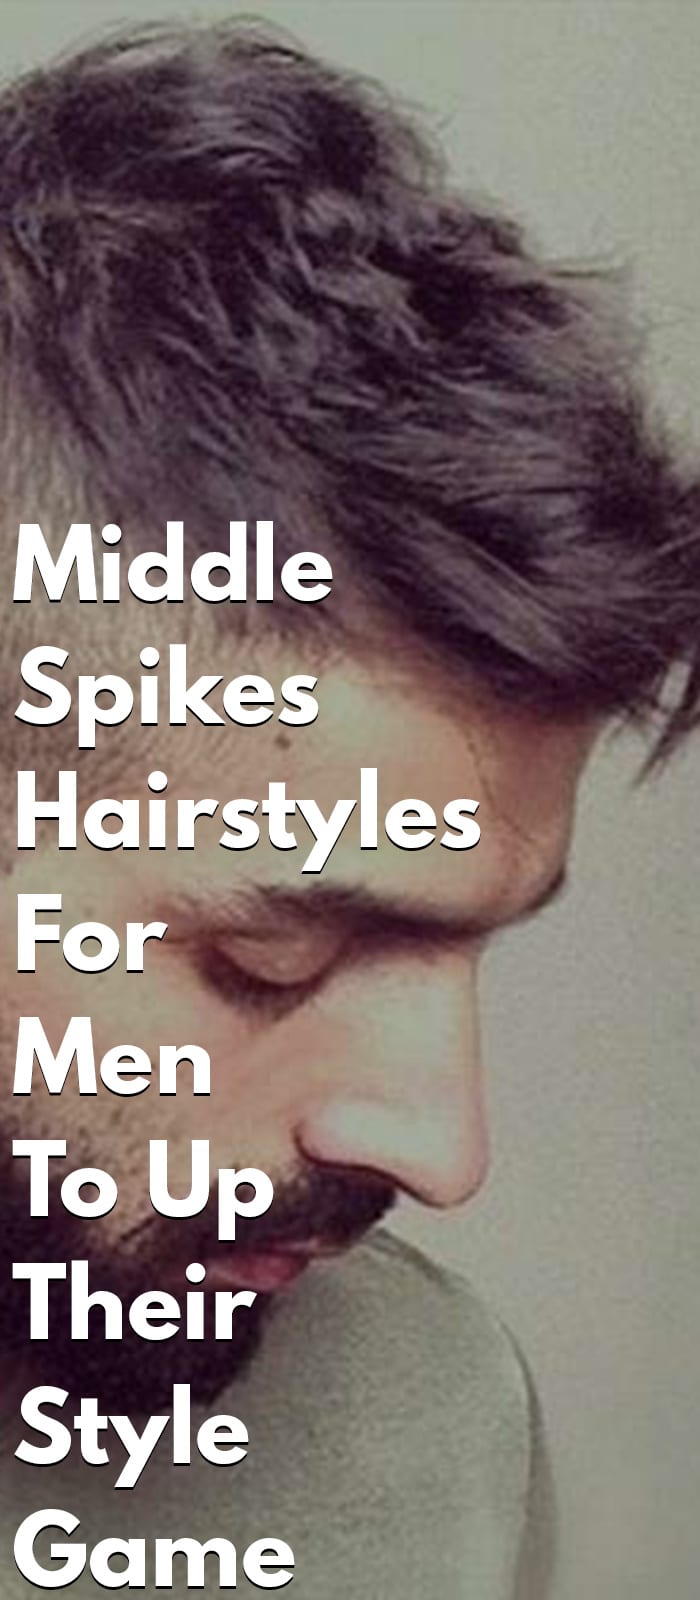 Middle Spikes Hairstyles For Men To Up Their Style Game